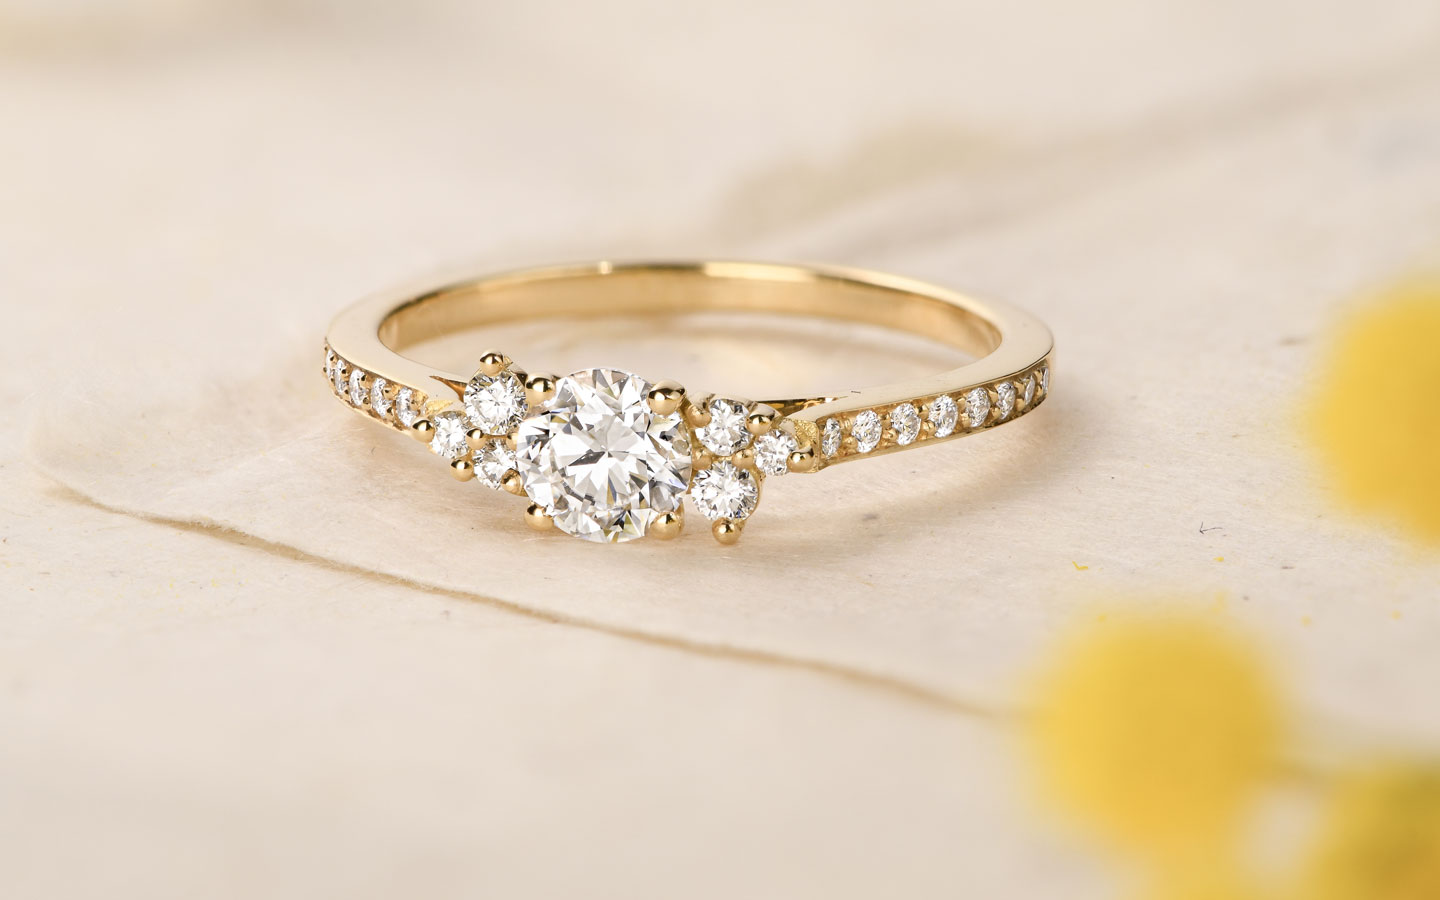 Bague Or jaune 18 cts Diamant Baby EverBloom 0,4 ct Pavée